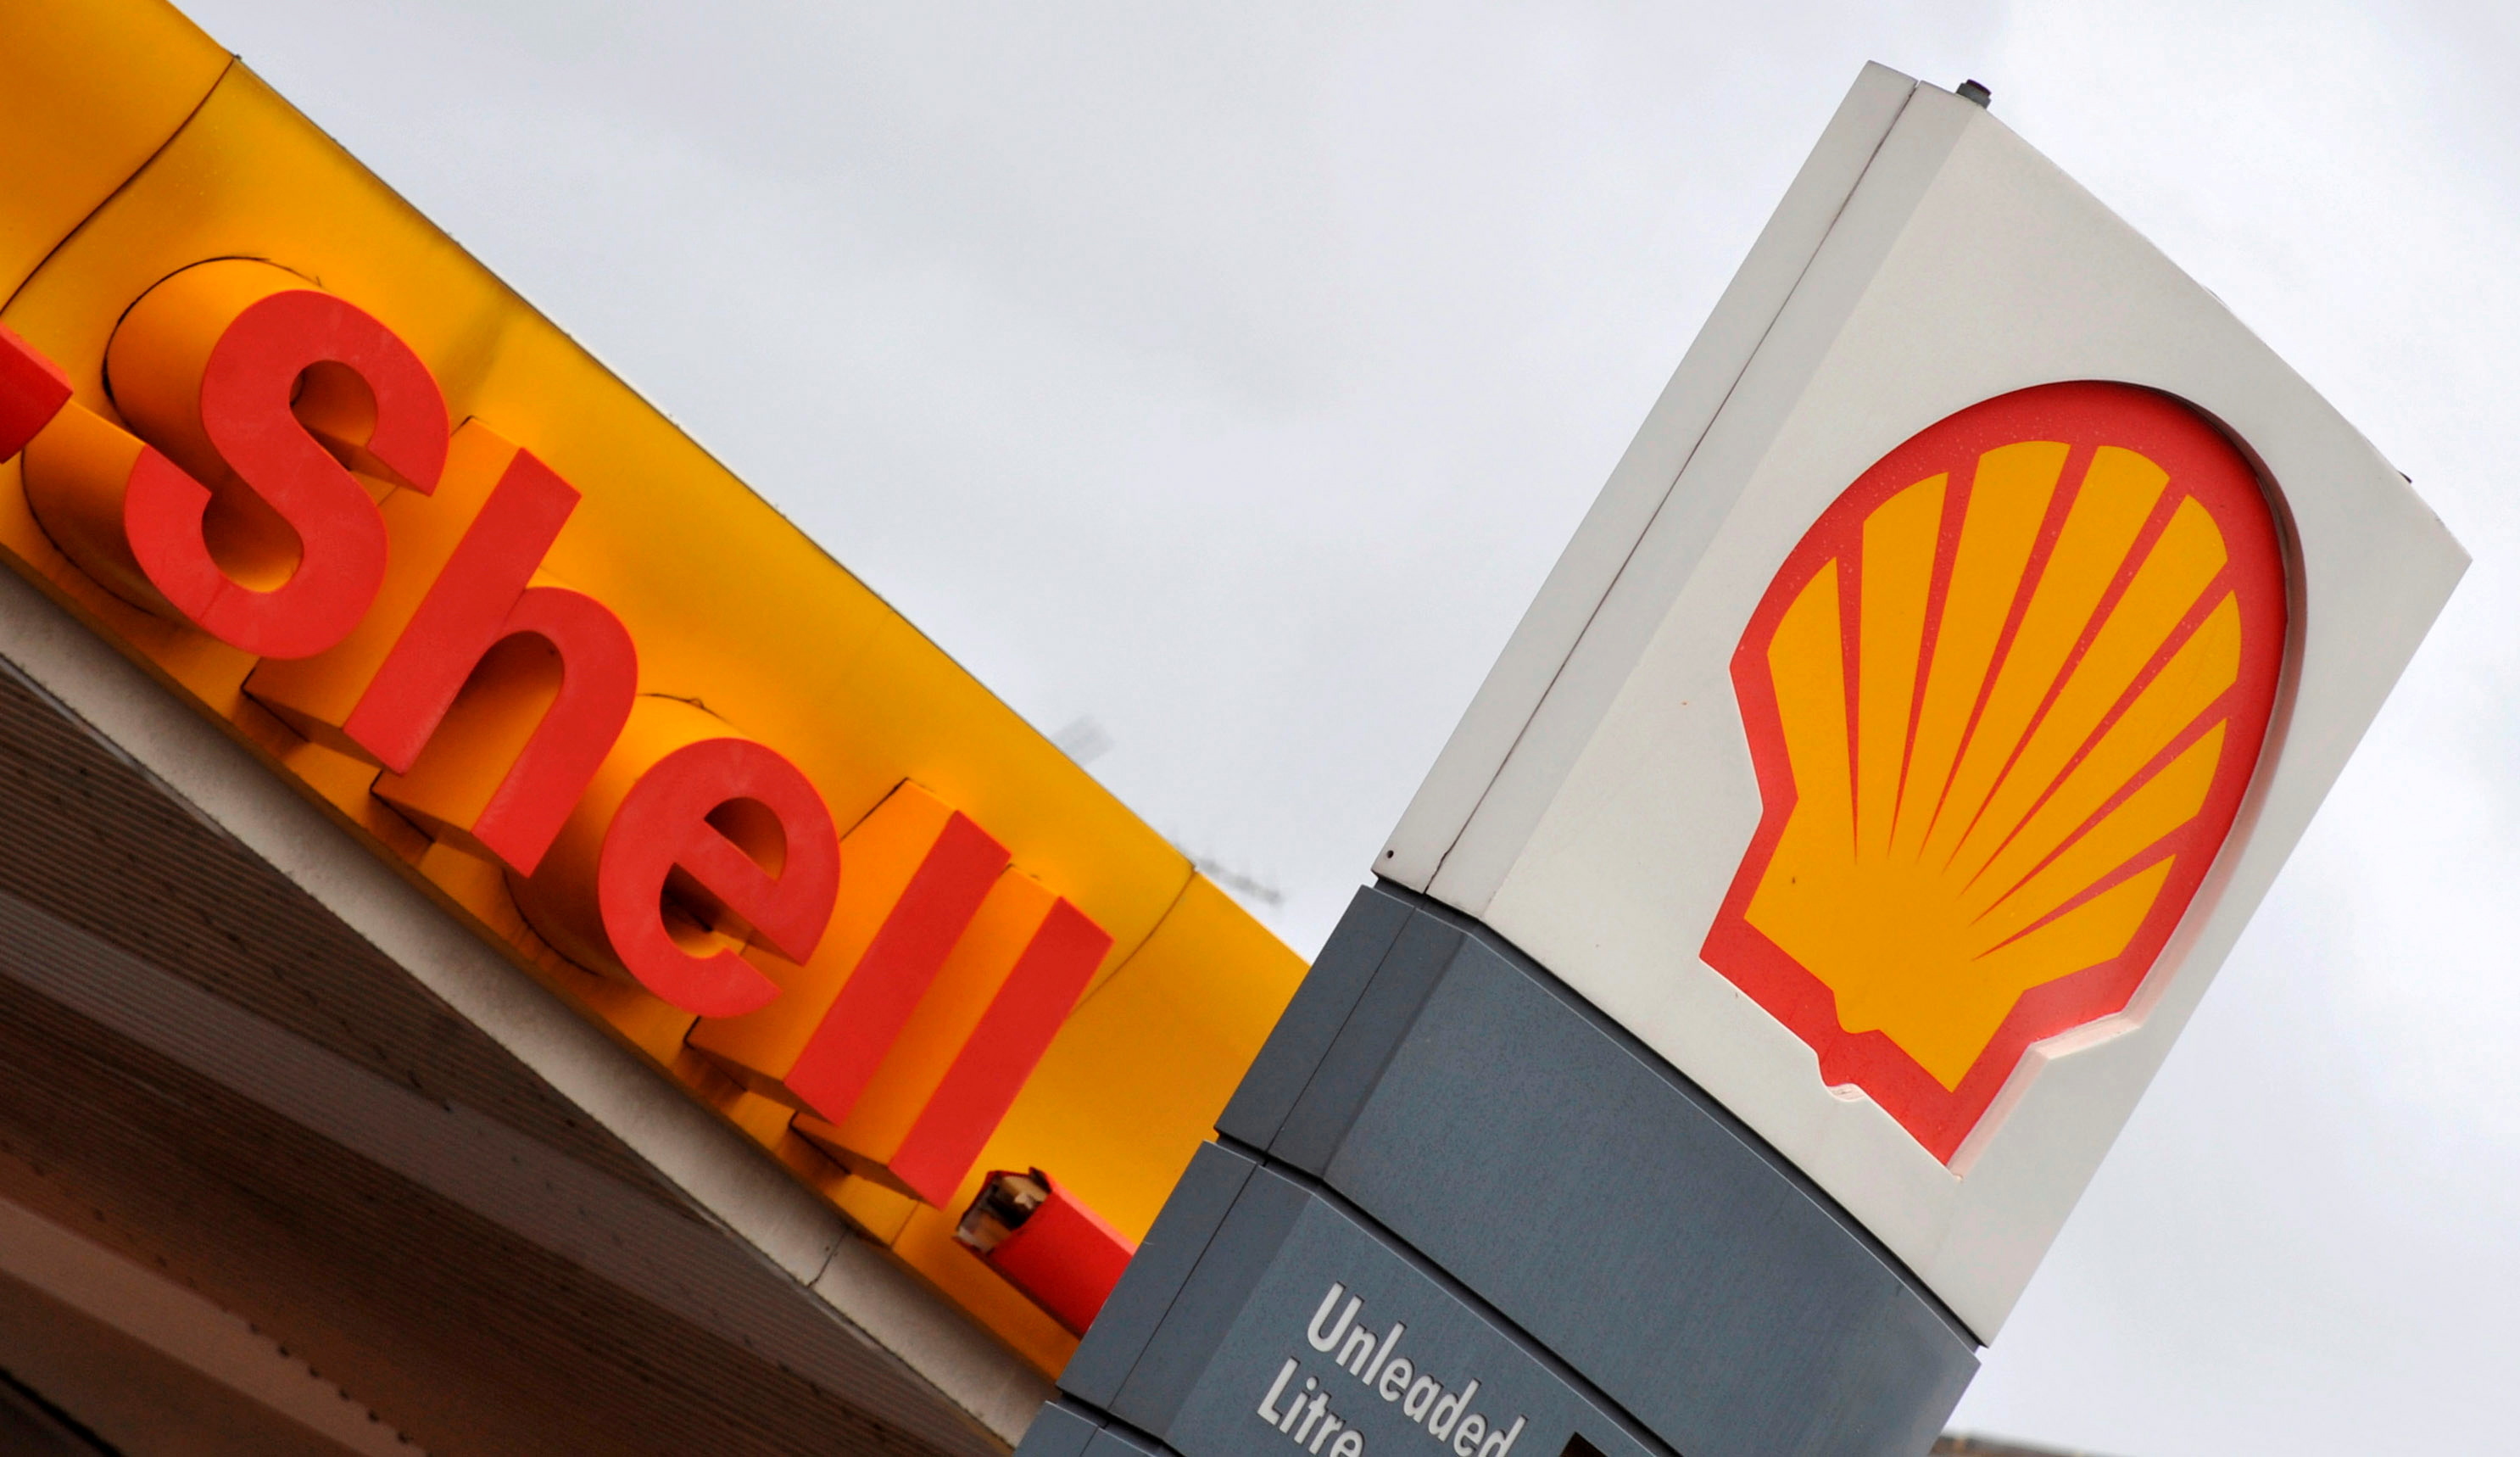 SHELL will establish a renewable hydrogen factory in the Netherlands